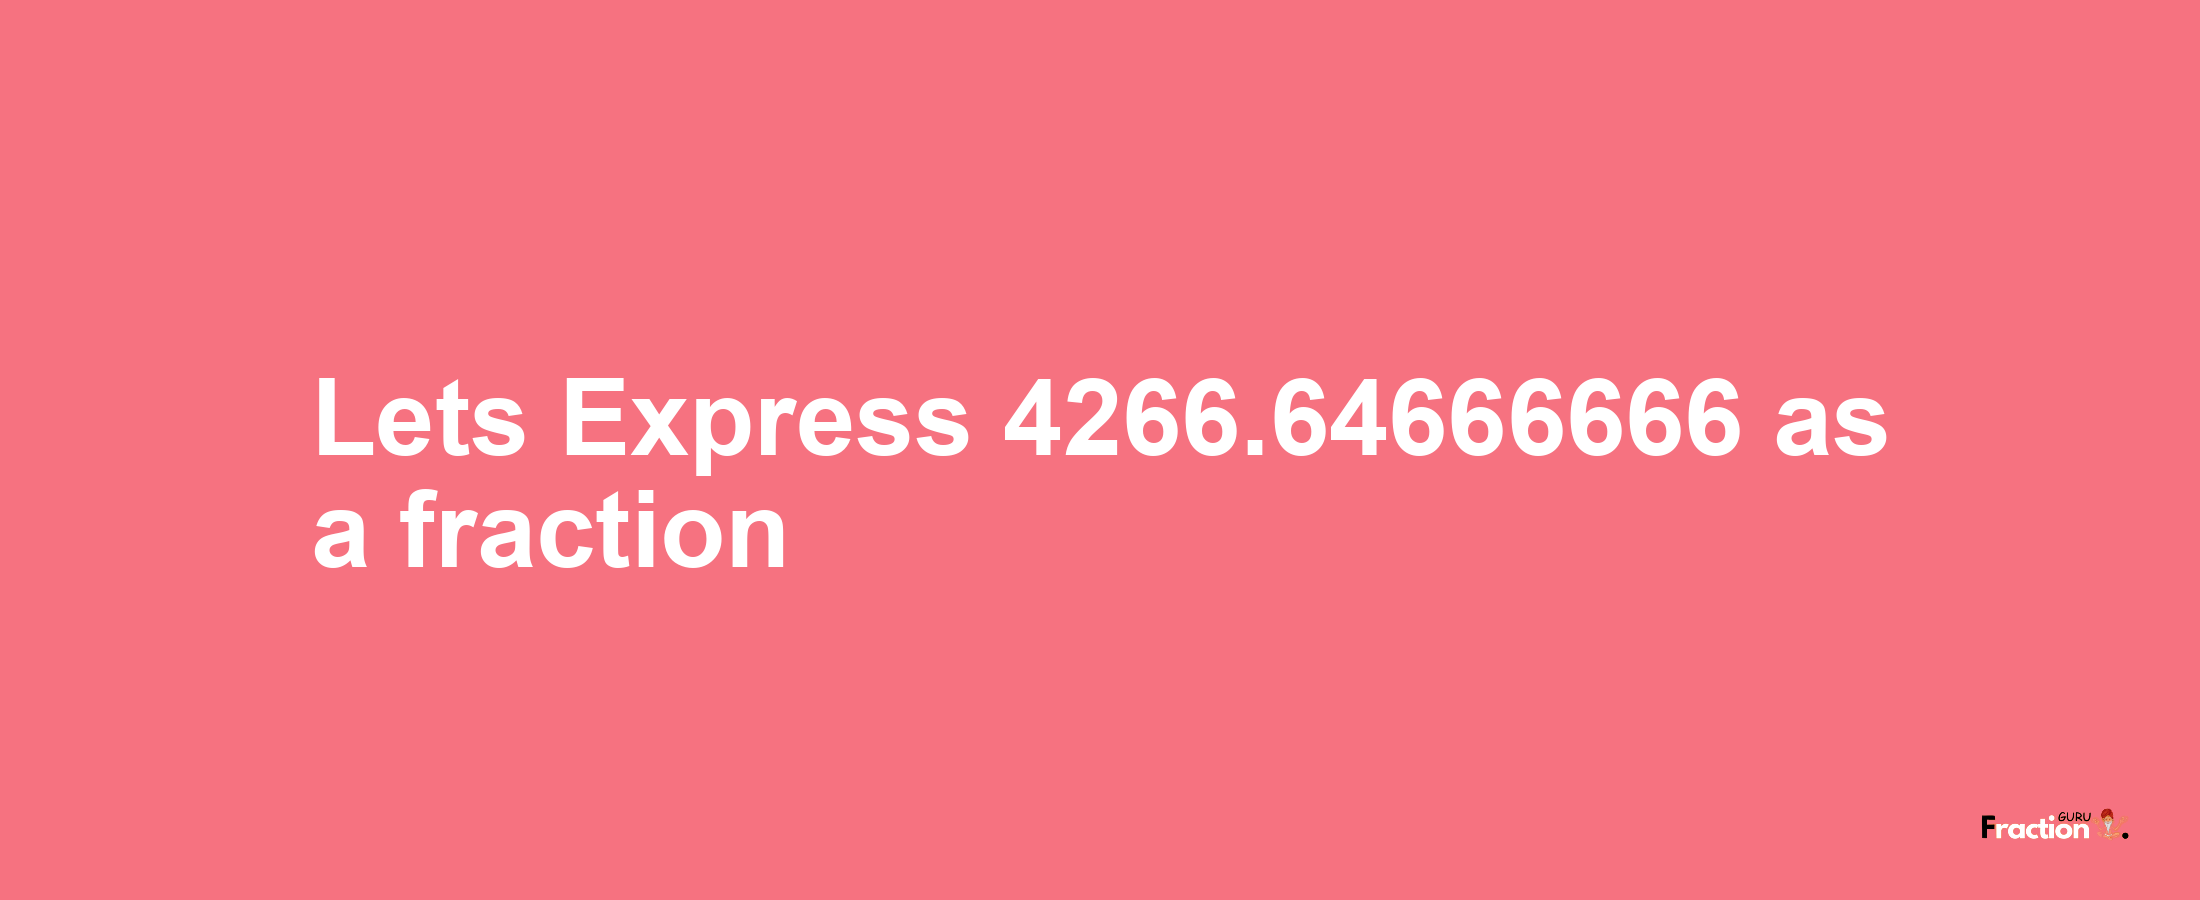 Lets Express 4266.64666666 as afraction